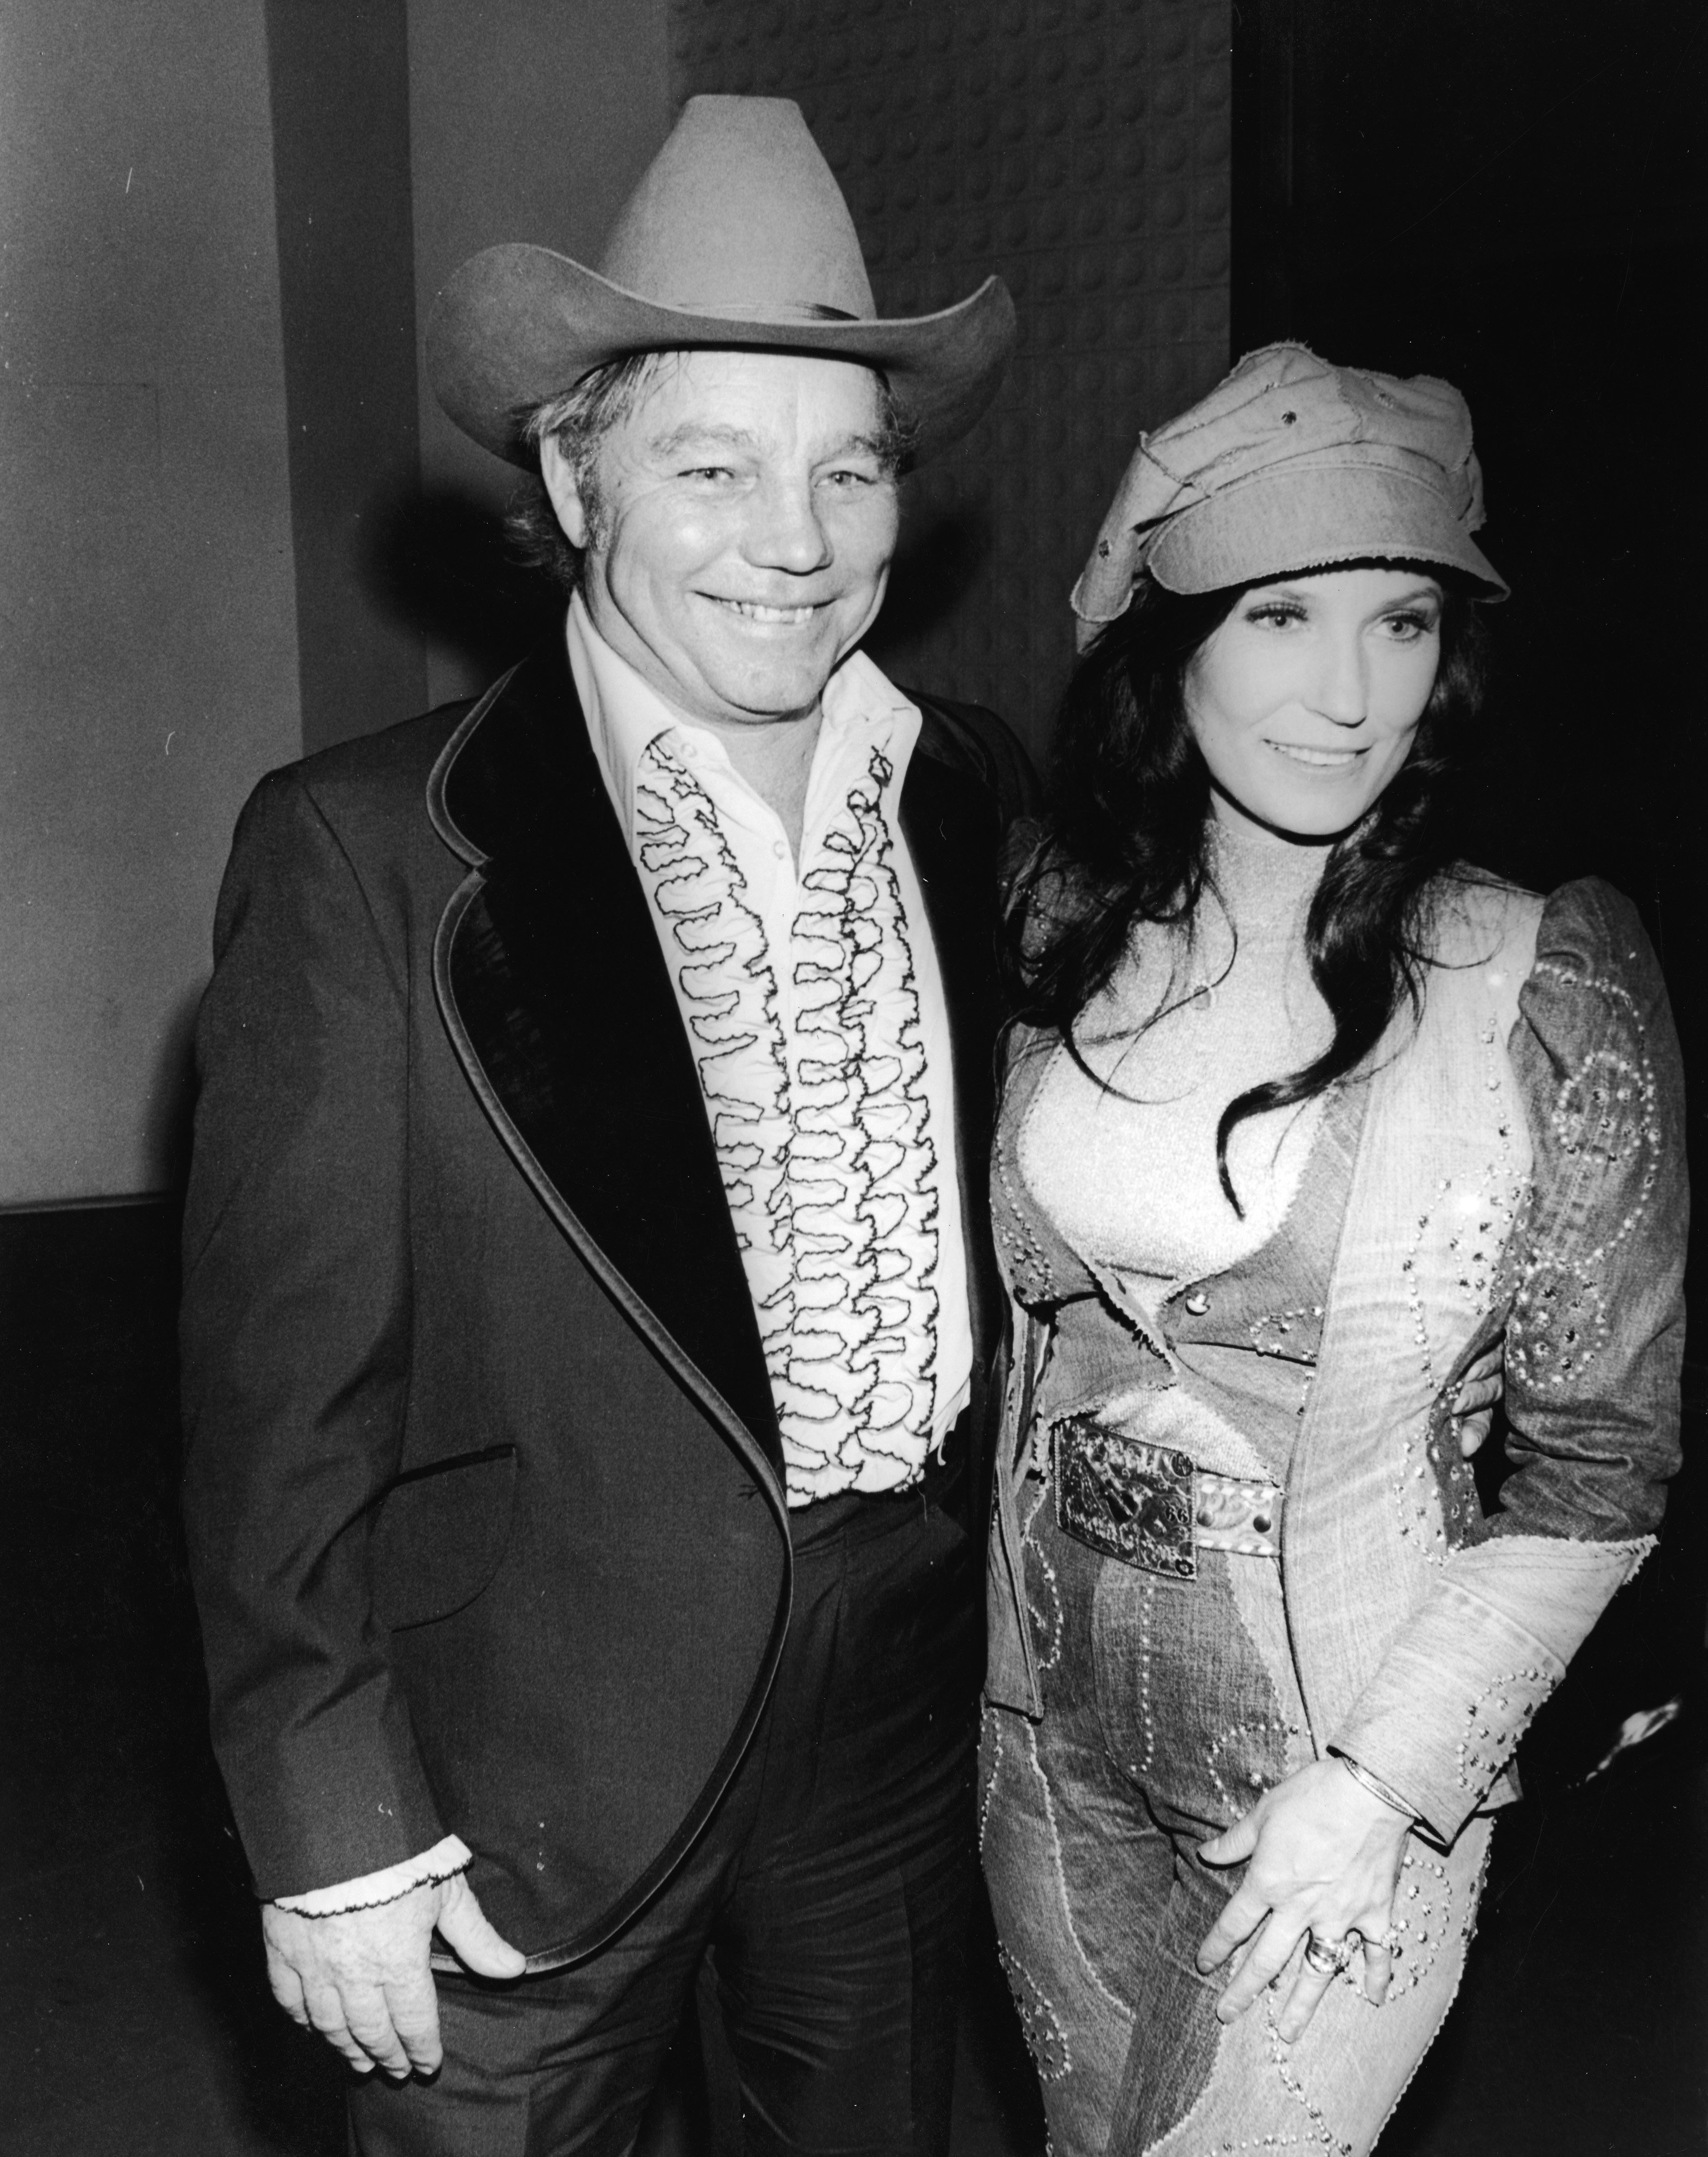 American country singer and guitarist Loretta Lynn and her husband Oliver Lynn, Jr.  (also known as Mooney) (1948 - 1996) at the Country & Western Music Awards, Hollywood, California, February 27, 1975. |  Photo: Getty Images